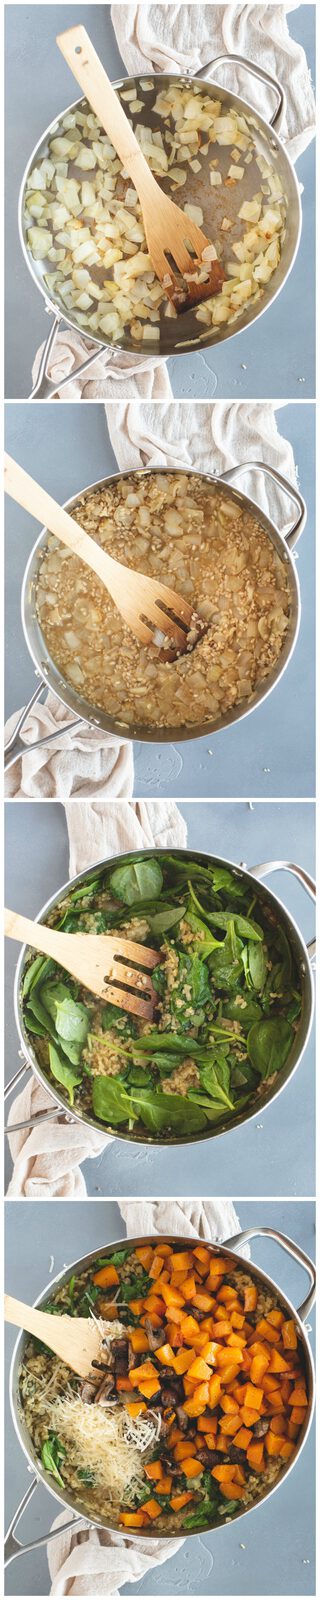 healthy brown rice risotto process steps